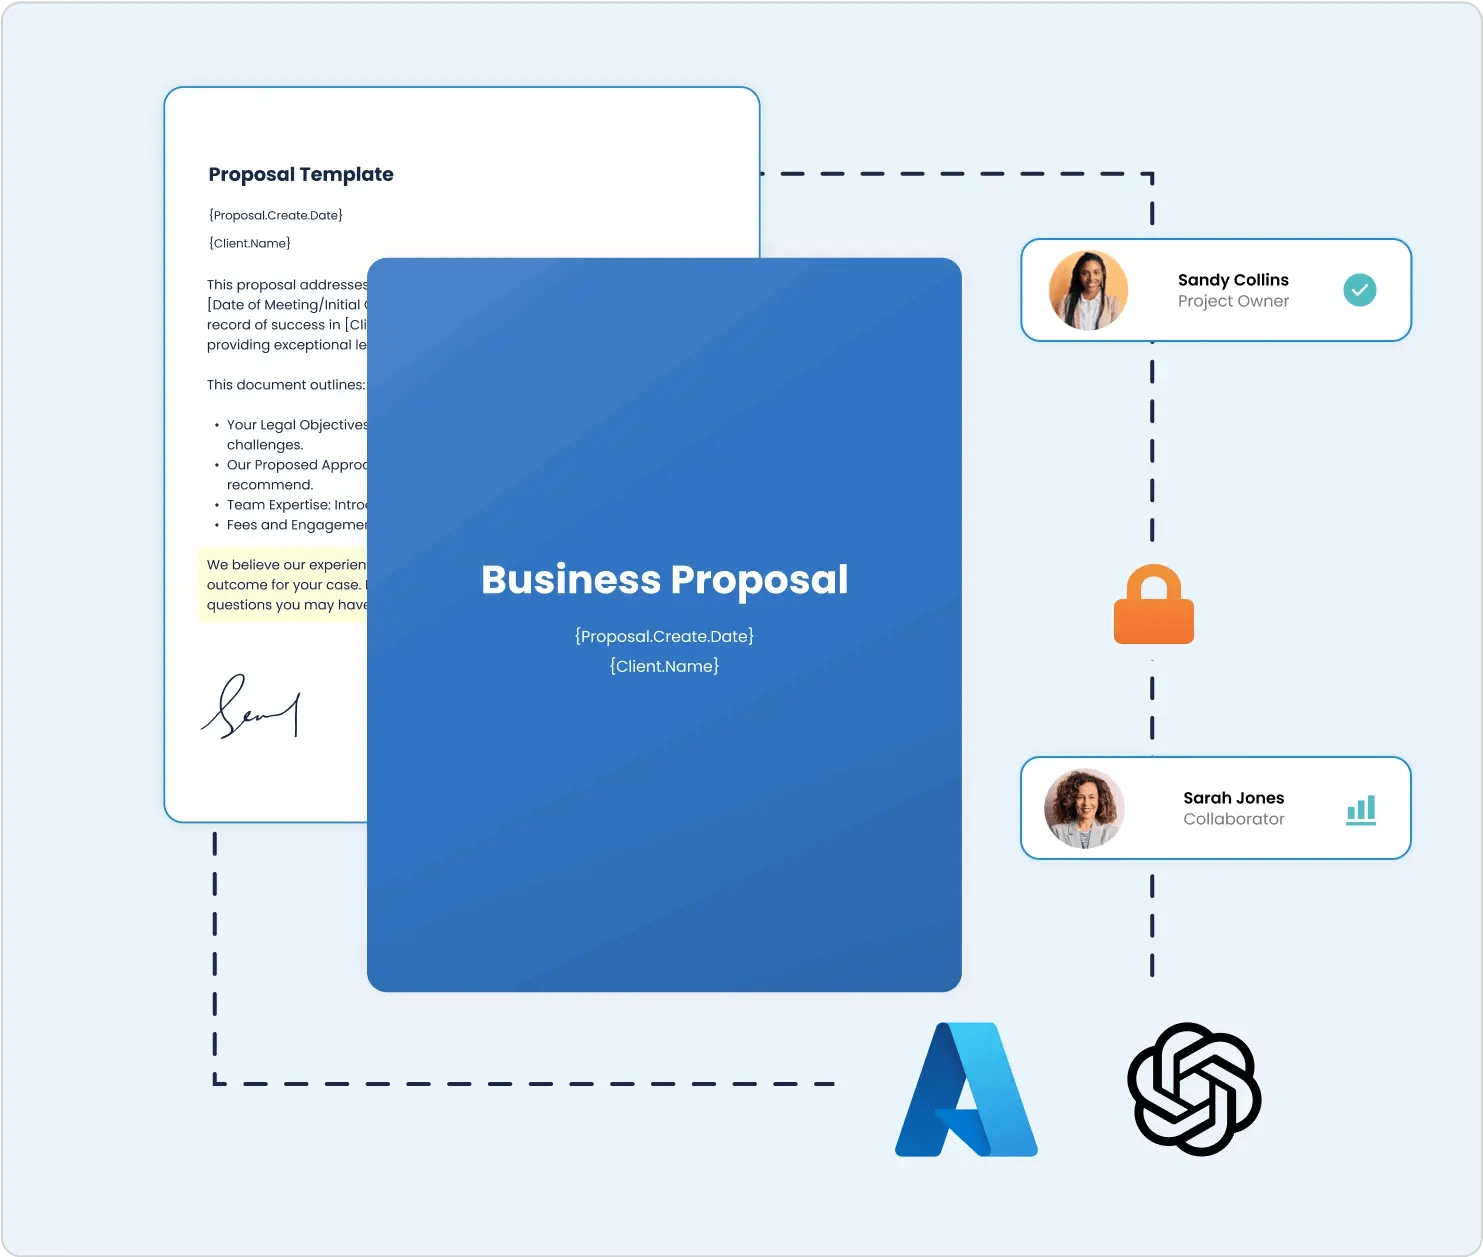 Secure proposal sharing based on private data